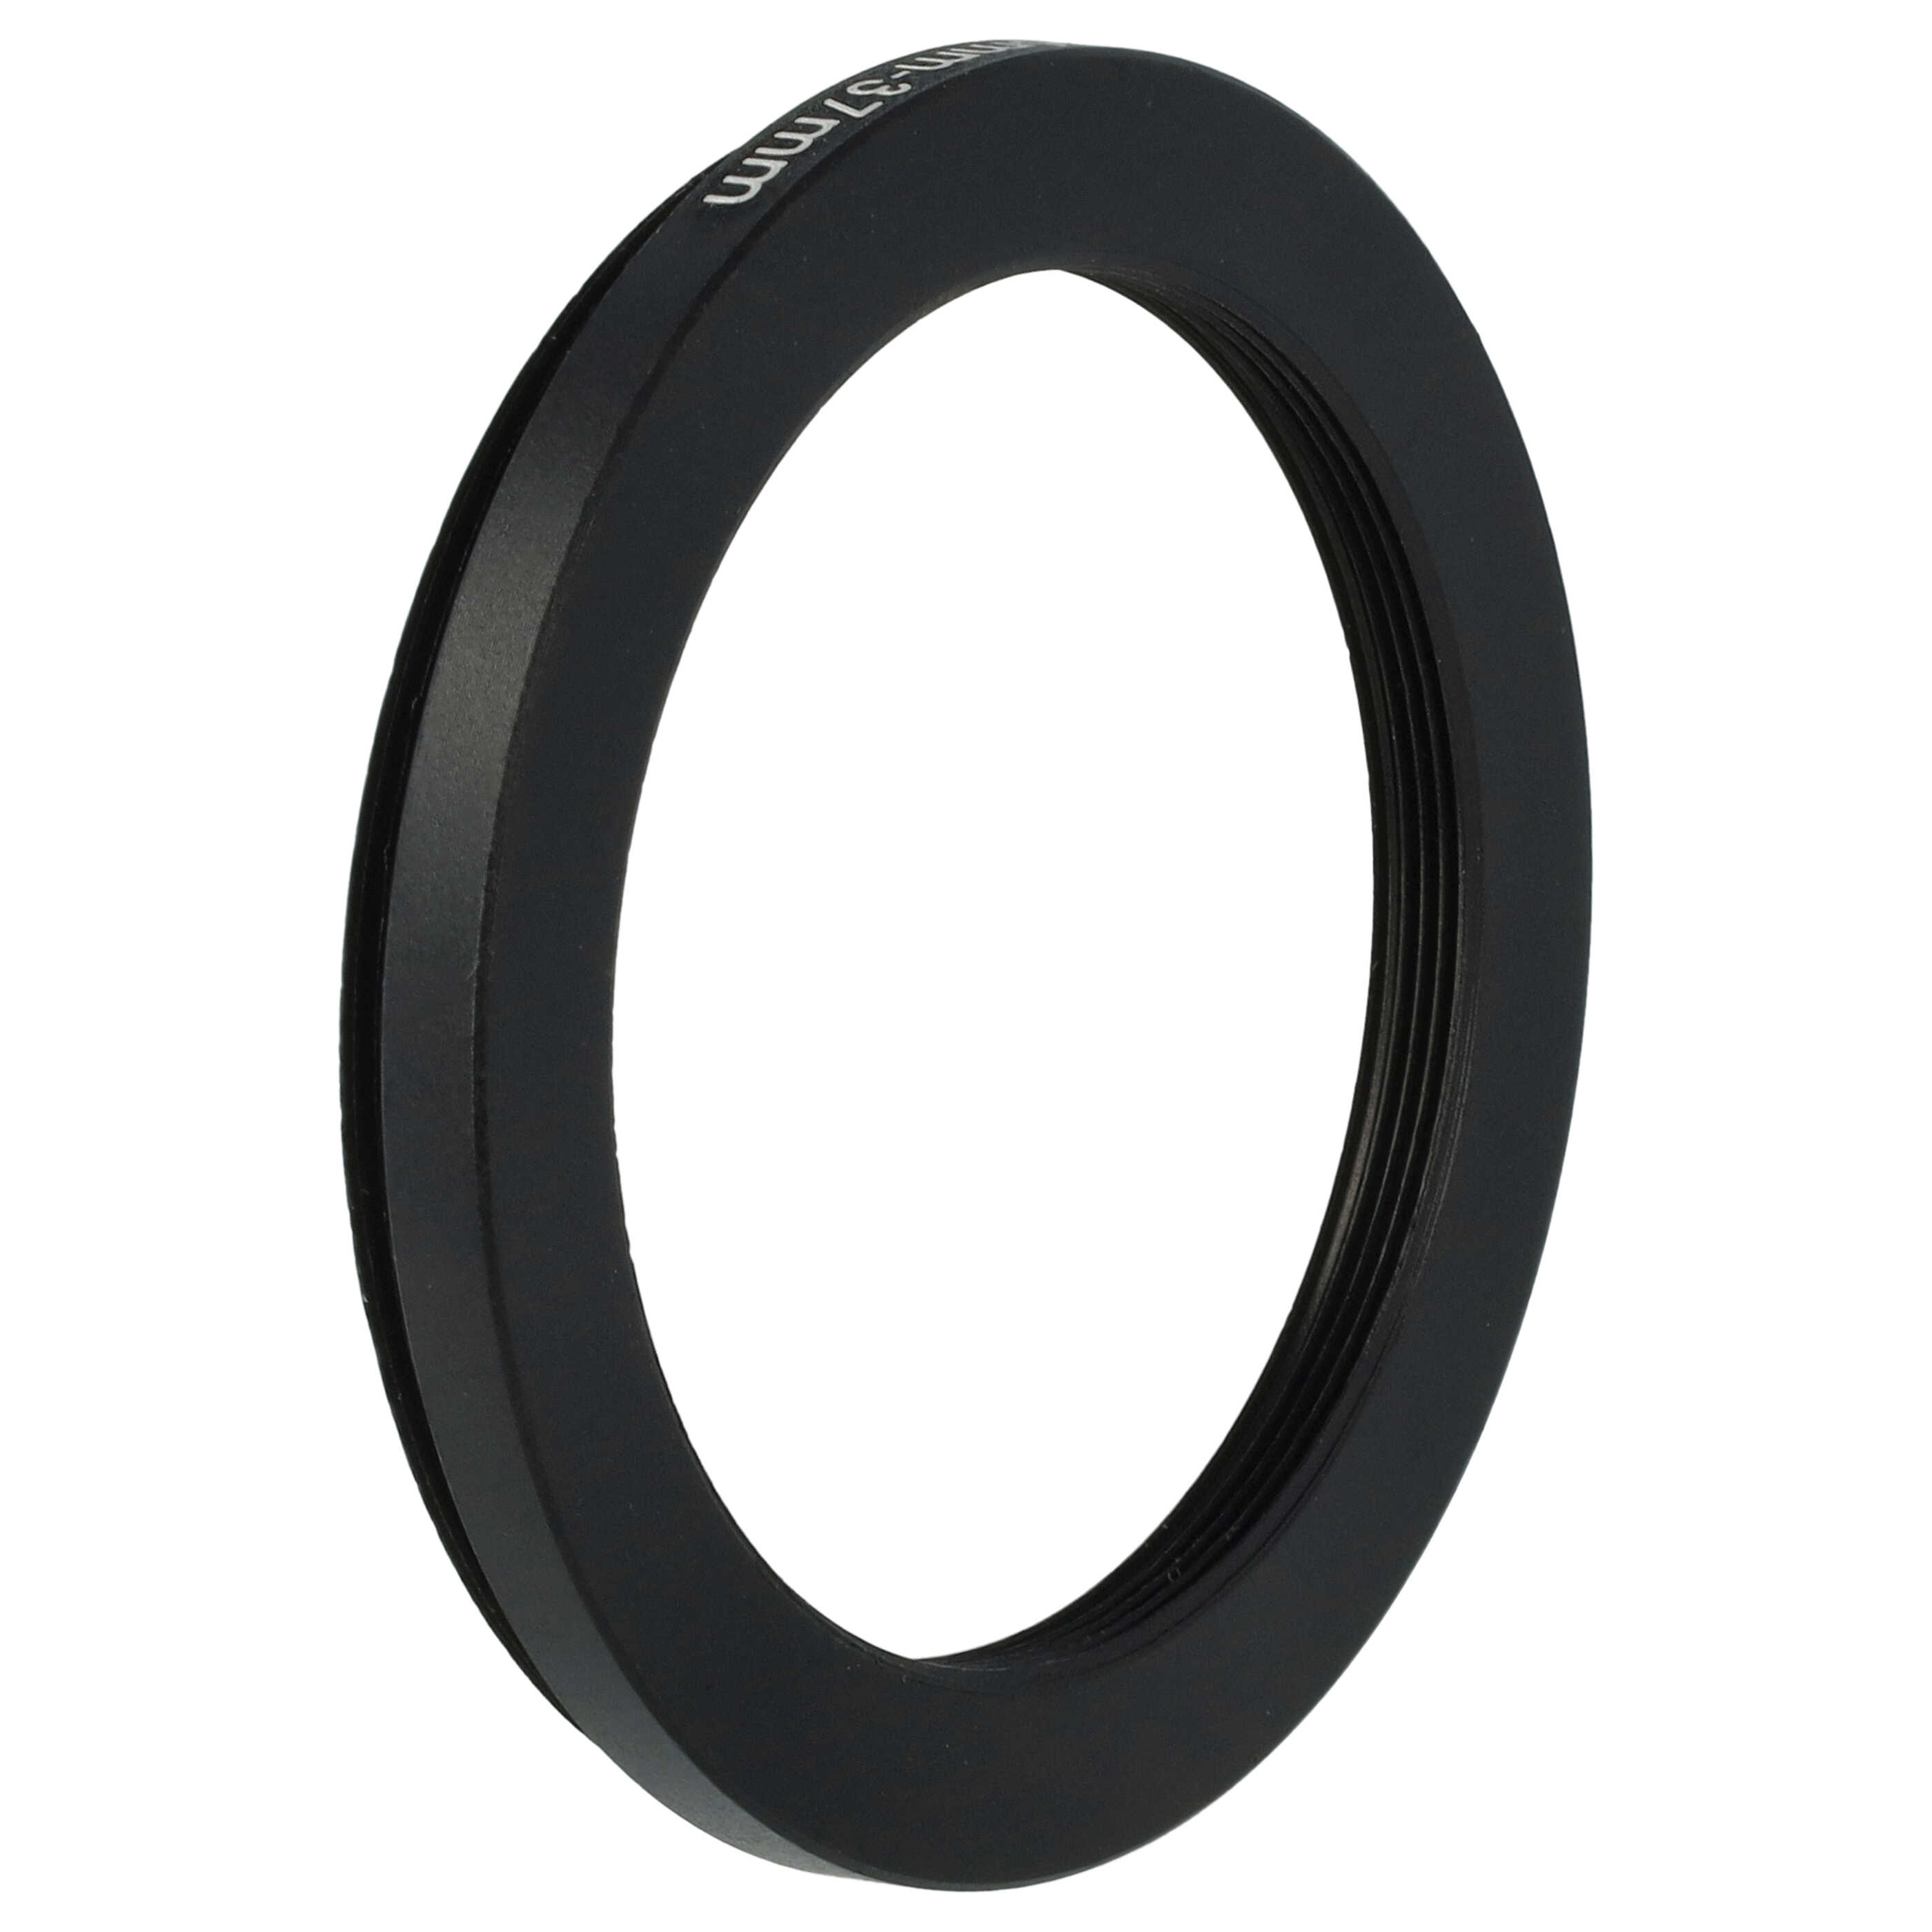 Step-Down Ring Adapter from 46 mm to 37 mm suitable for Camera Lens - Filter Adapter, metal